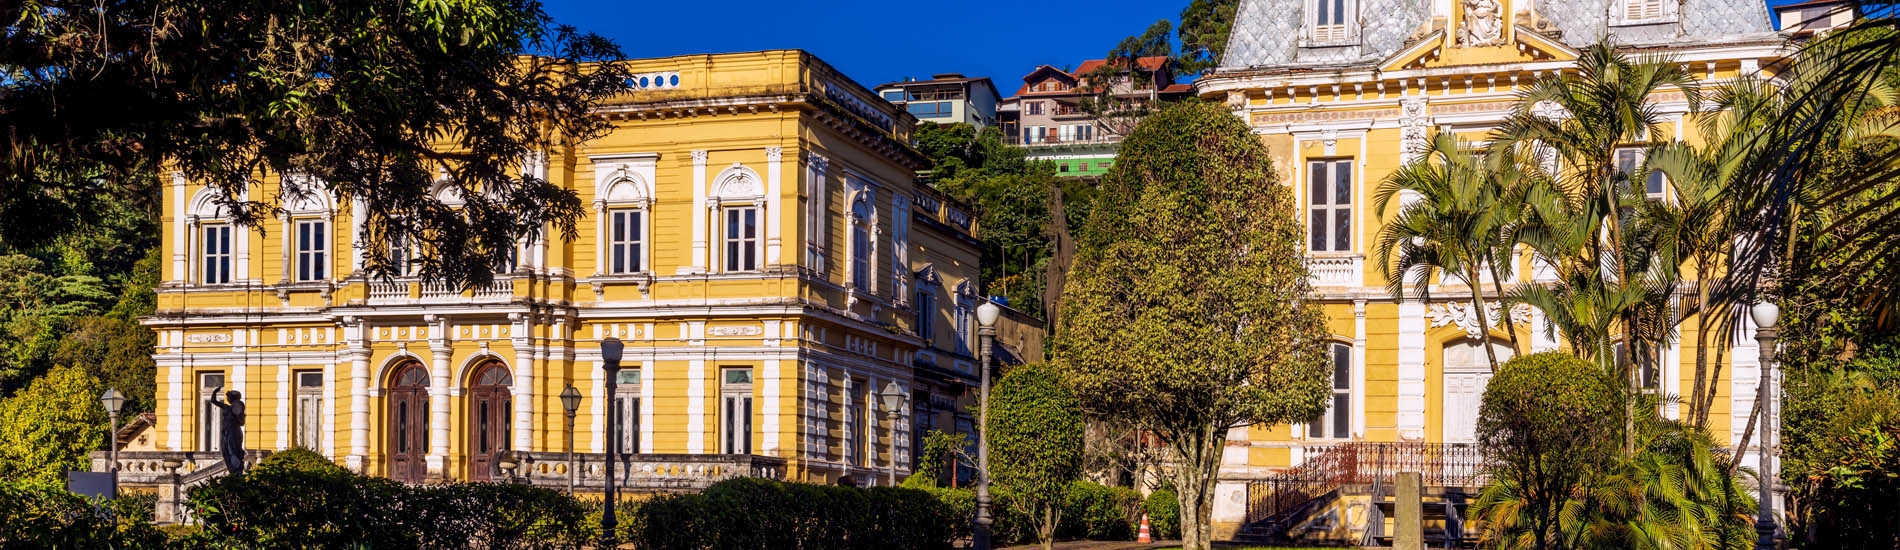 The imperial atmosphere and architecture of Petrópolis